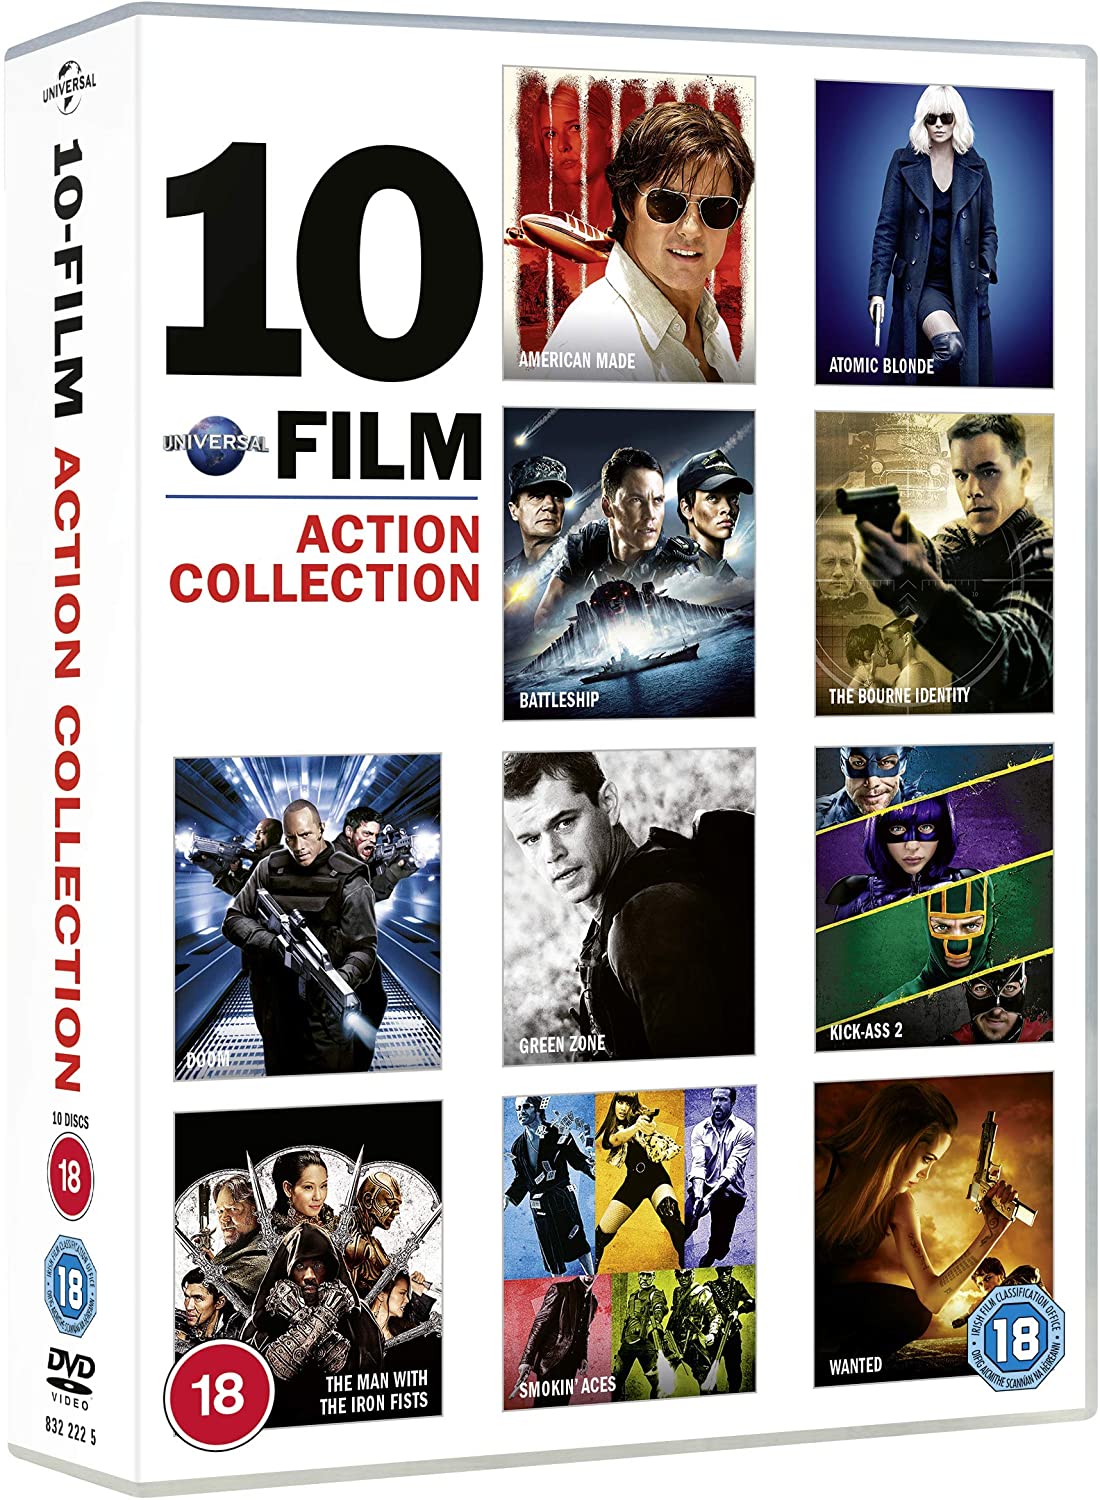 Universal 10 Action Film Collection (DVD)